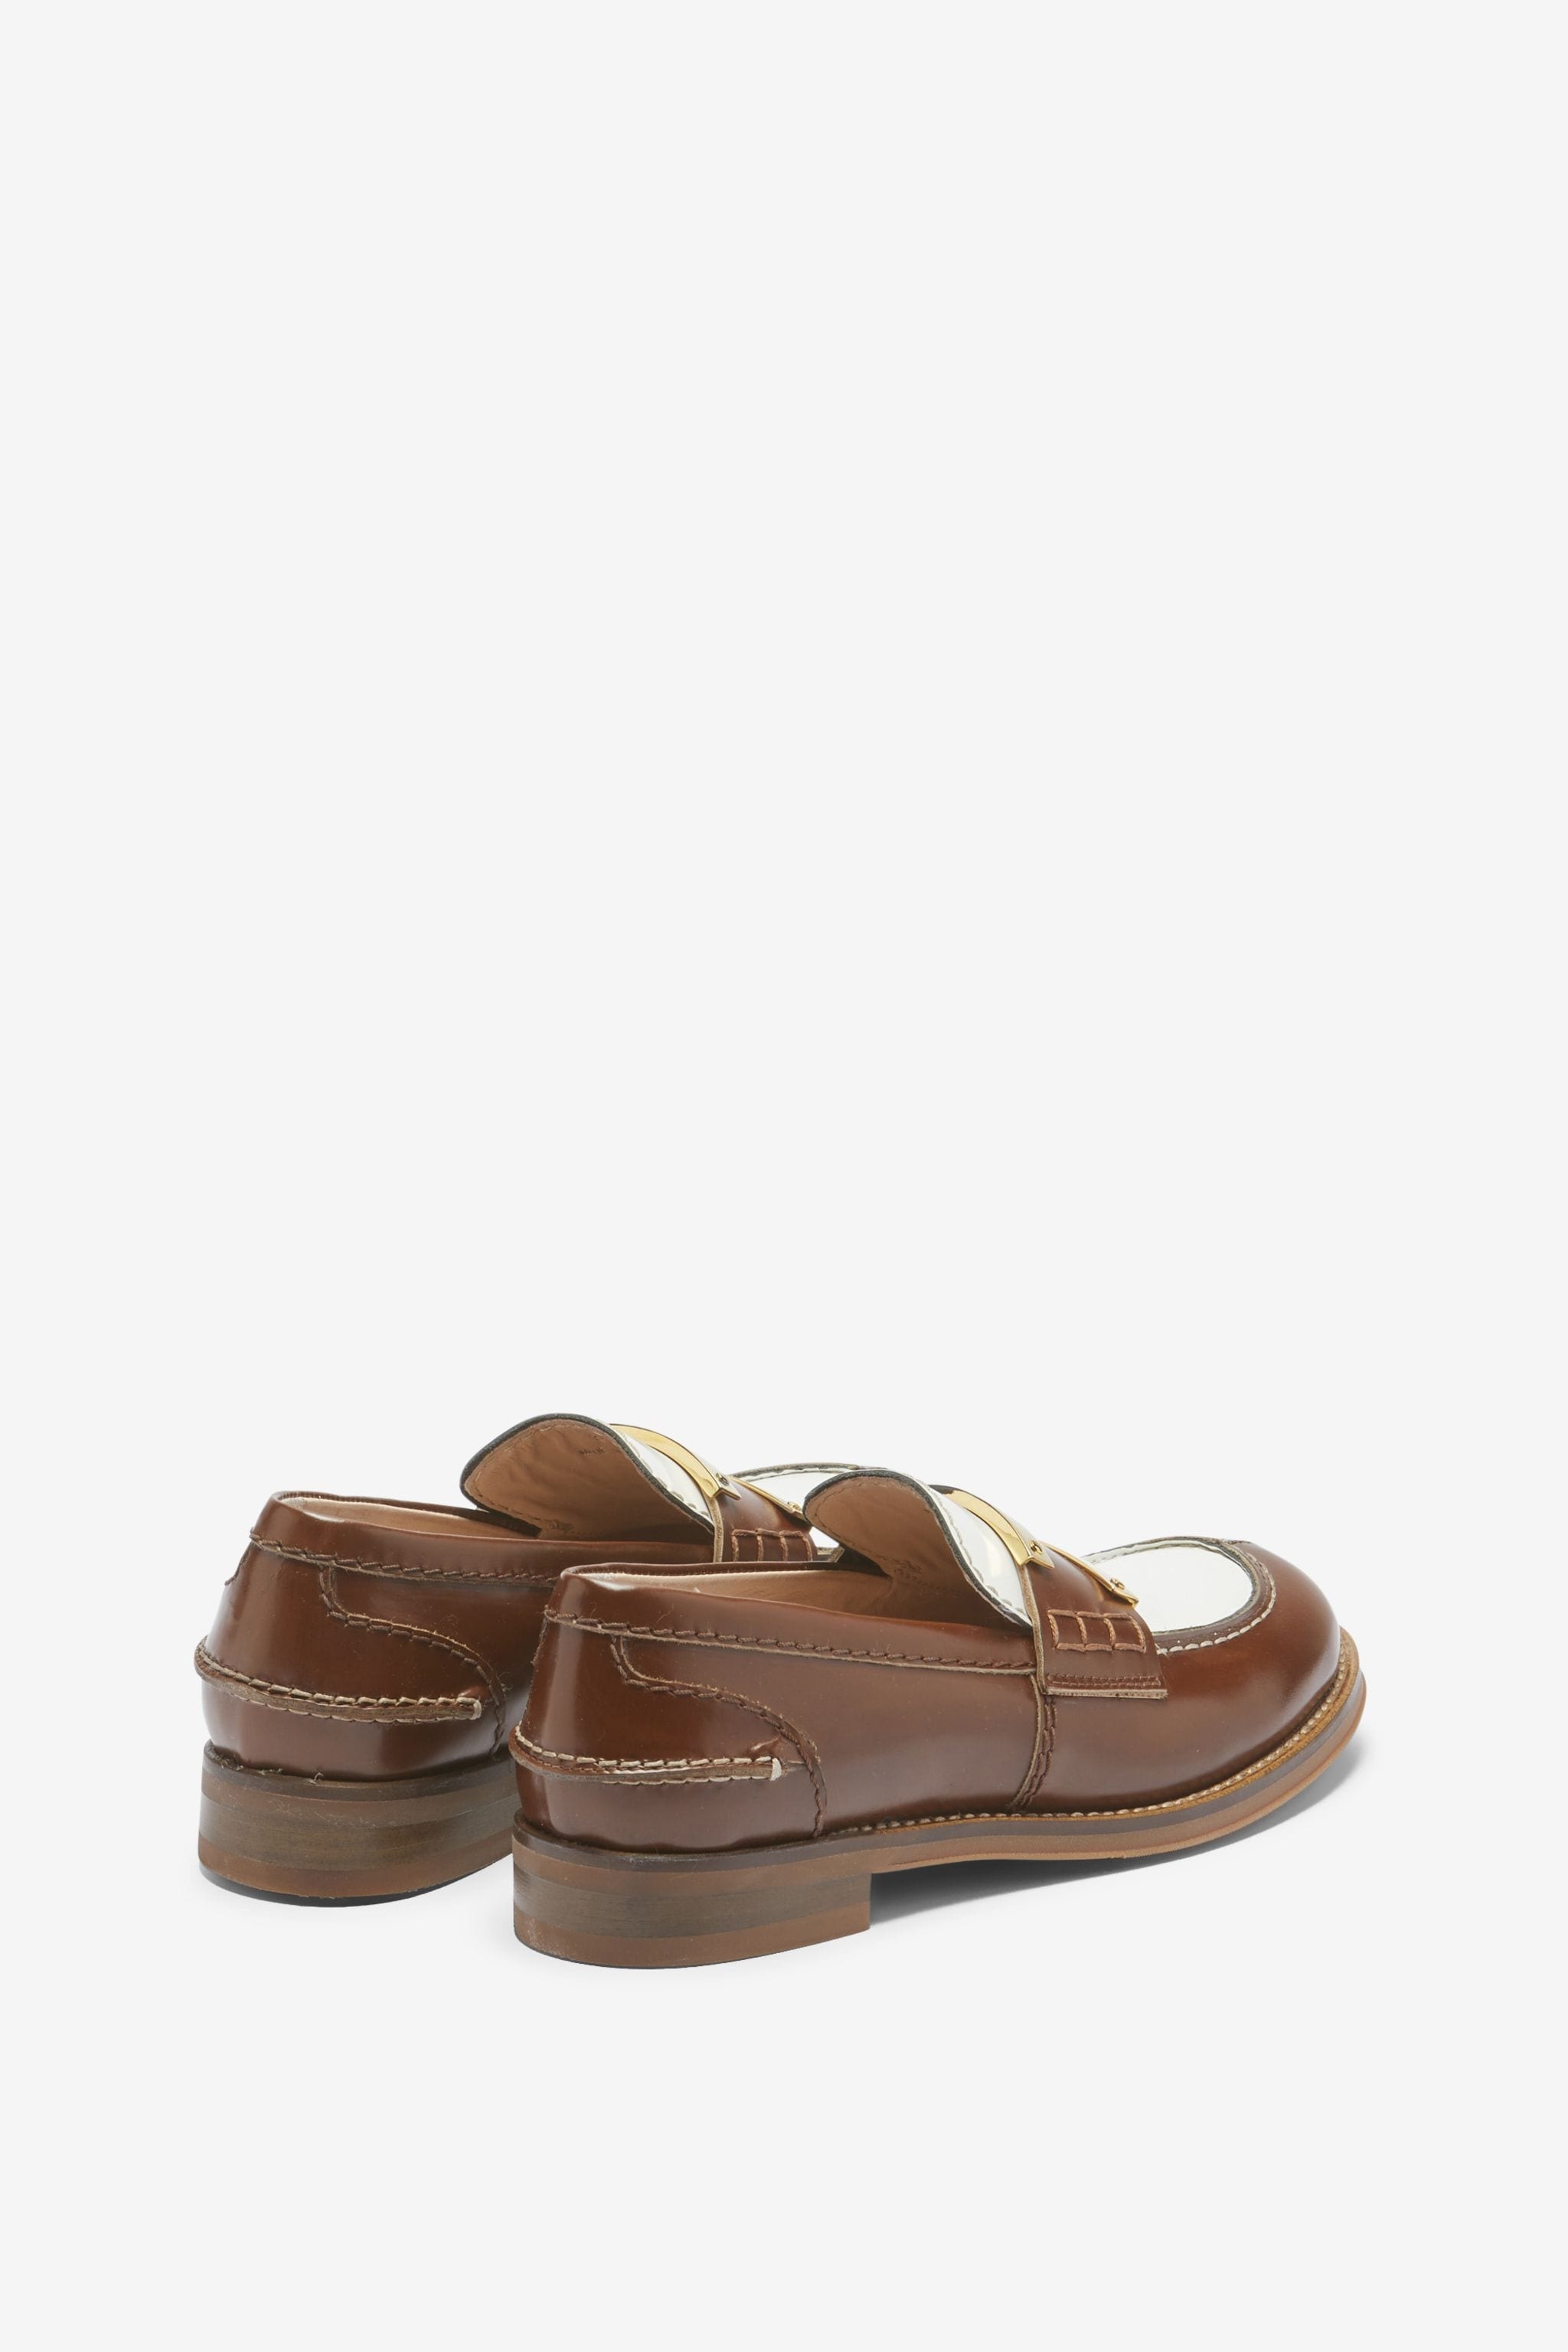 COLOURBLOCK LEATHER LOAFERS - 3